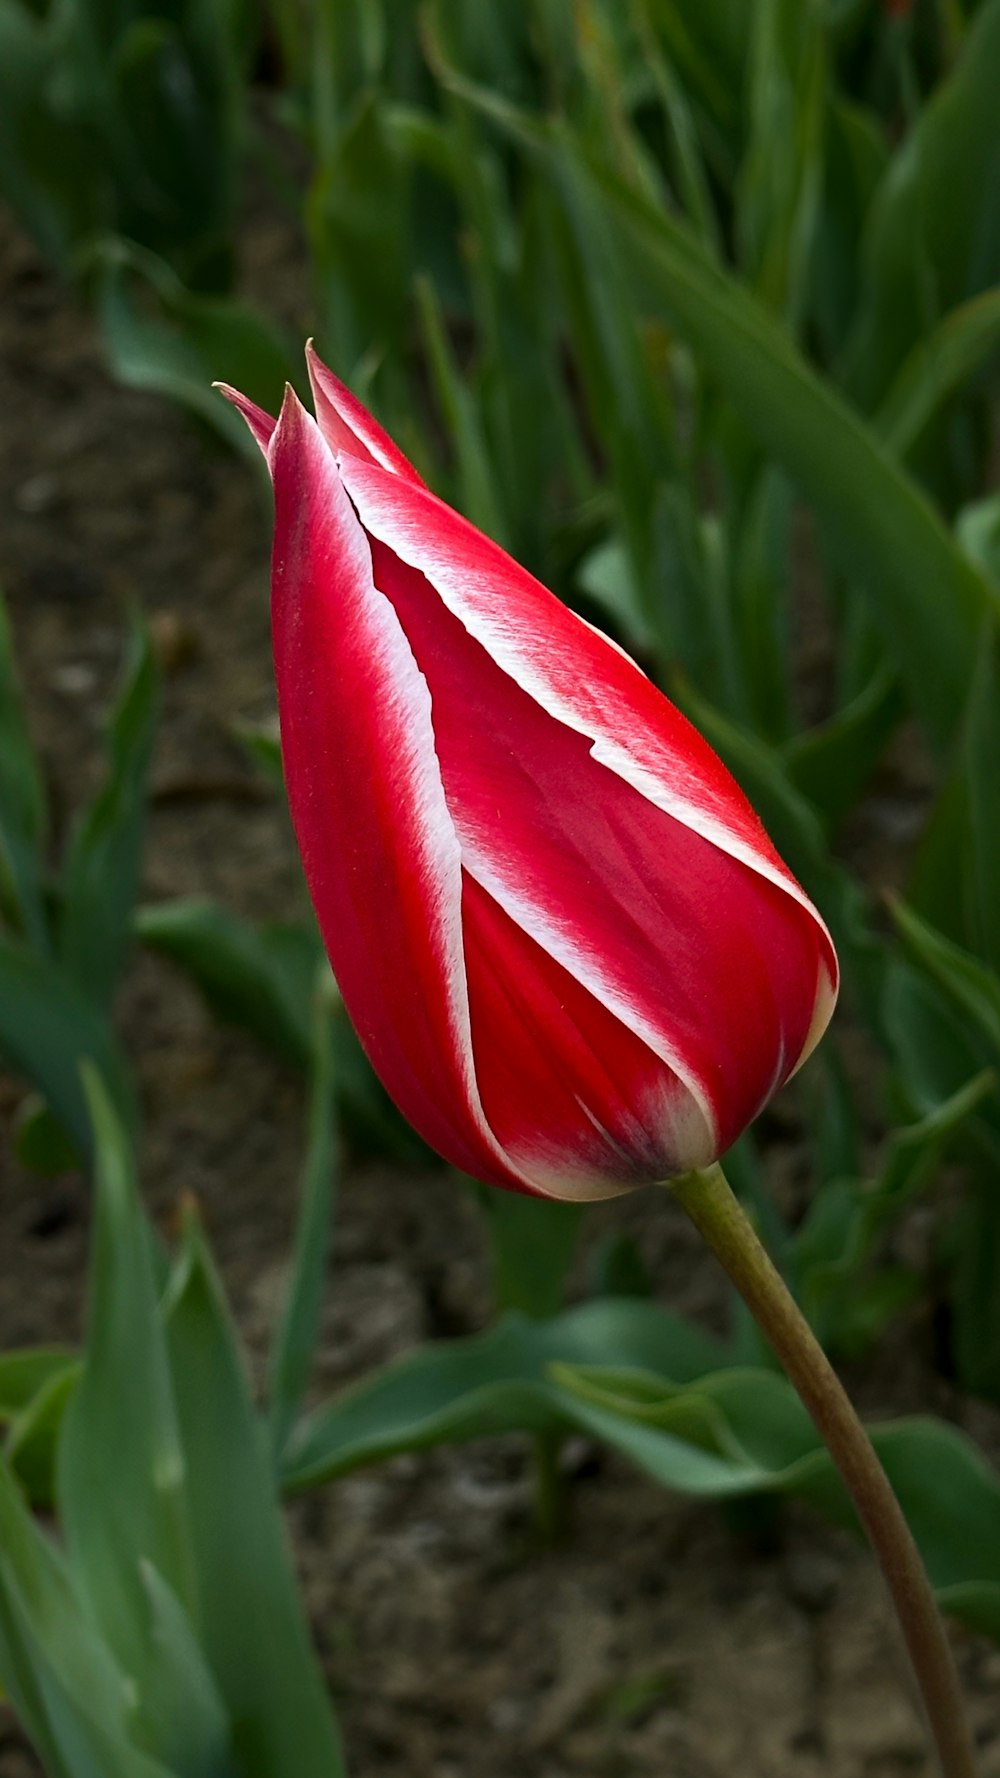 a red and white tulip in a field of green grass